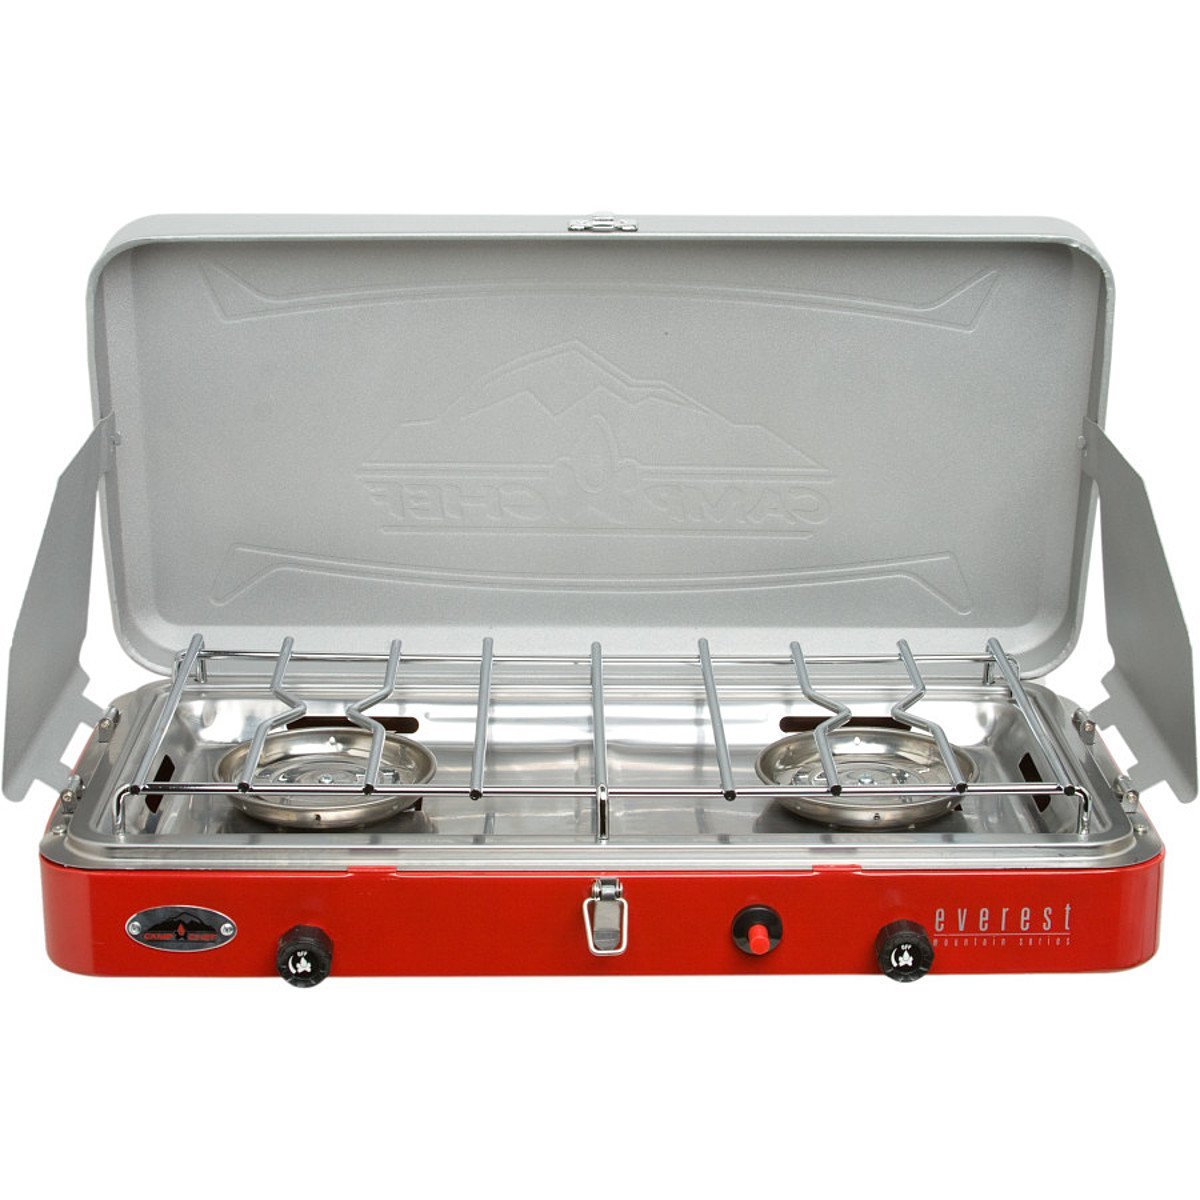 Camp Chef Everest High Output 2 Burner Stove, only $72.70, free shipping